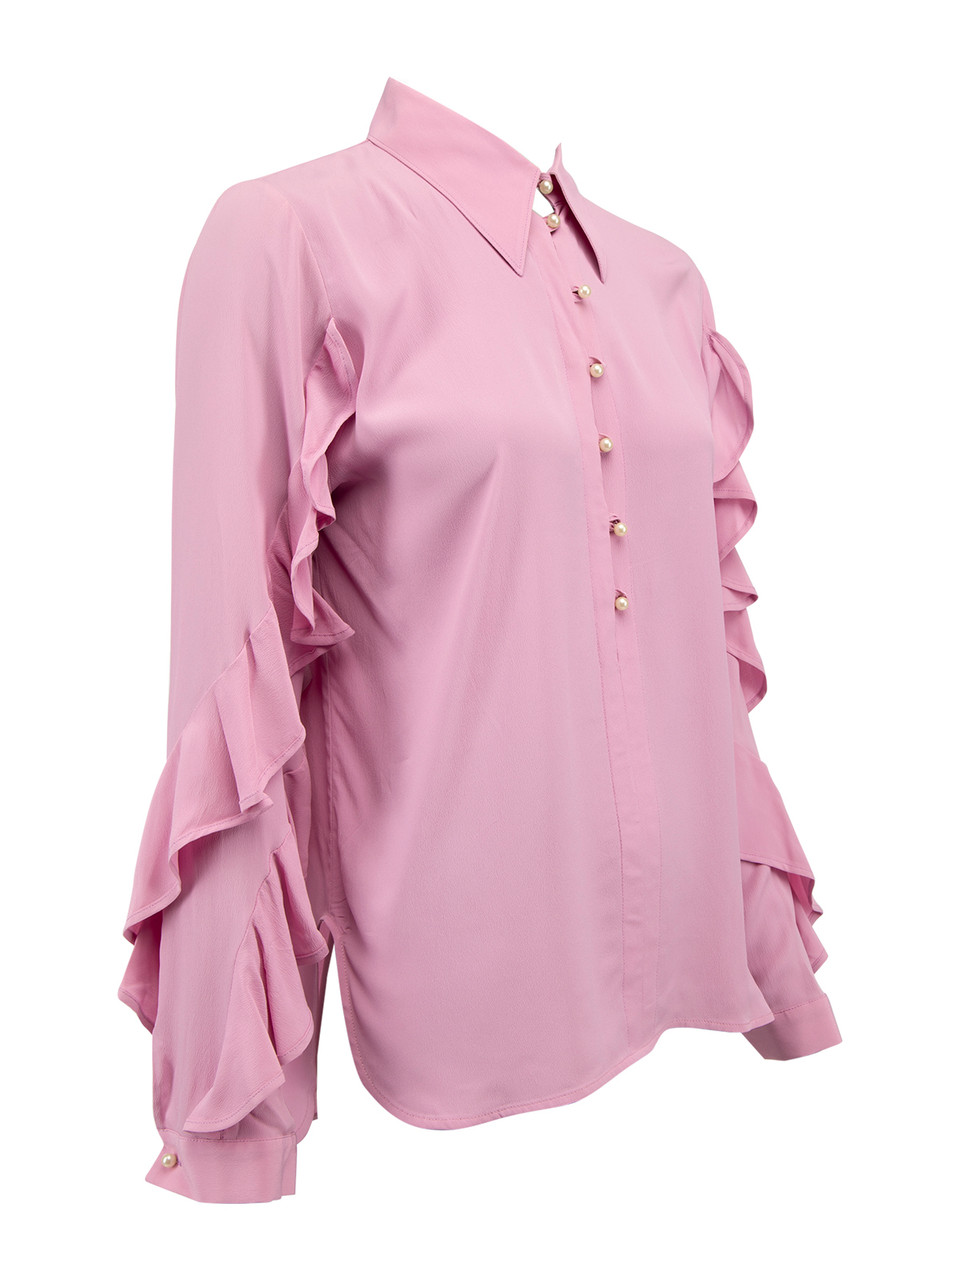 N°21 Collared Blouse with Ruffled Sleeves